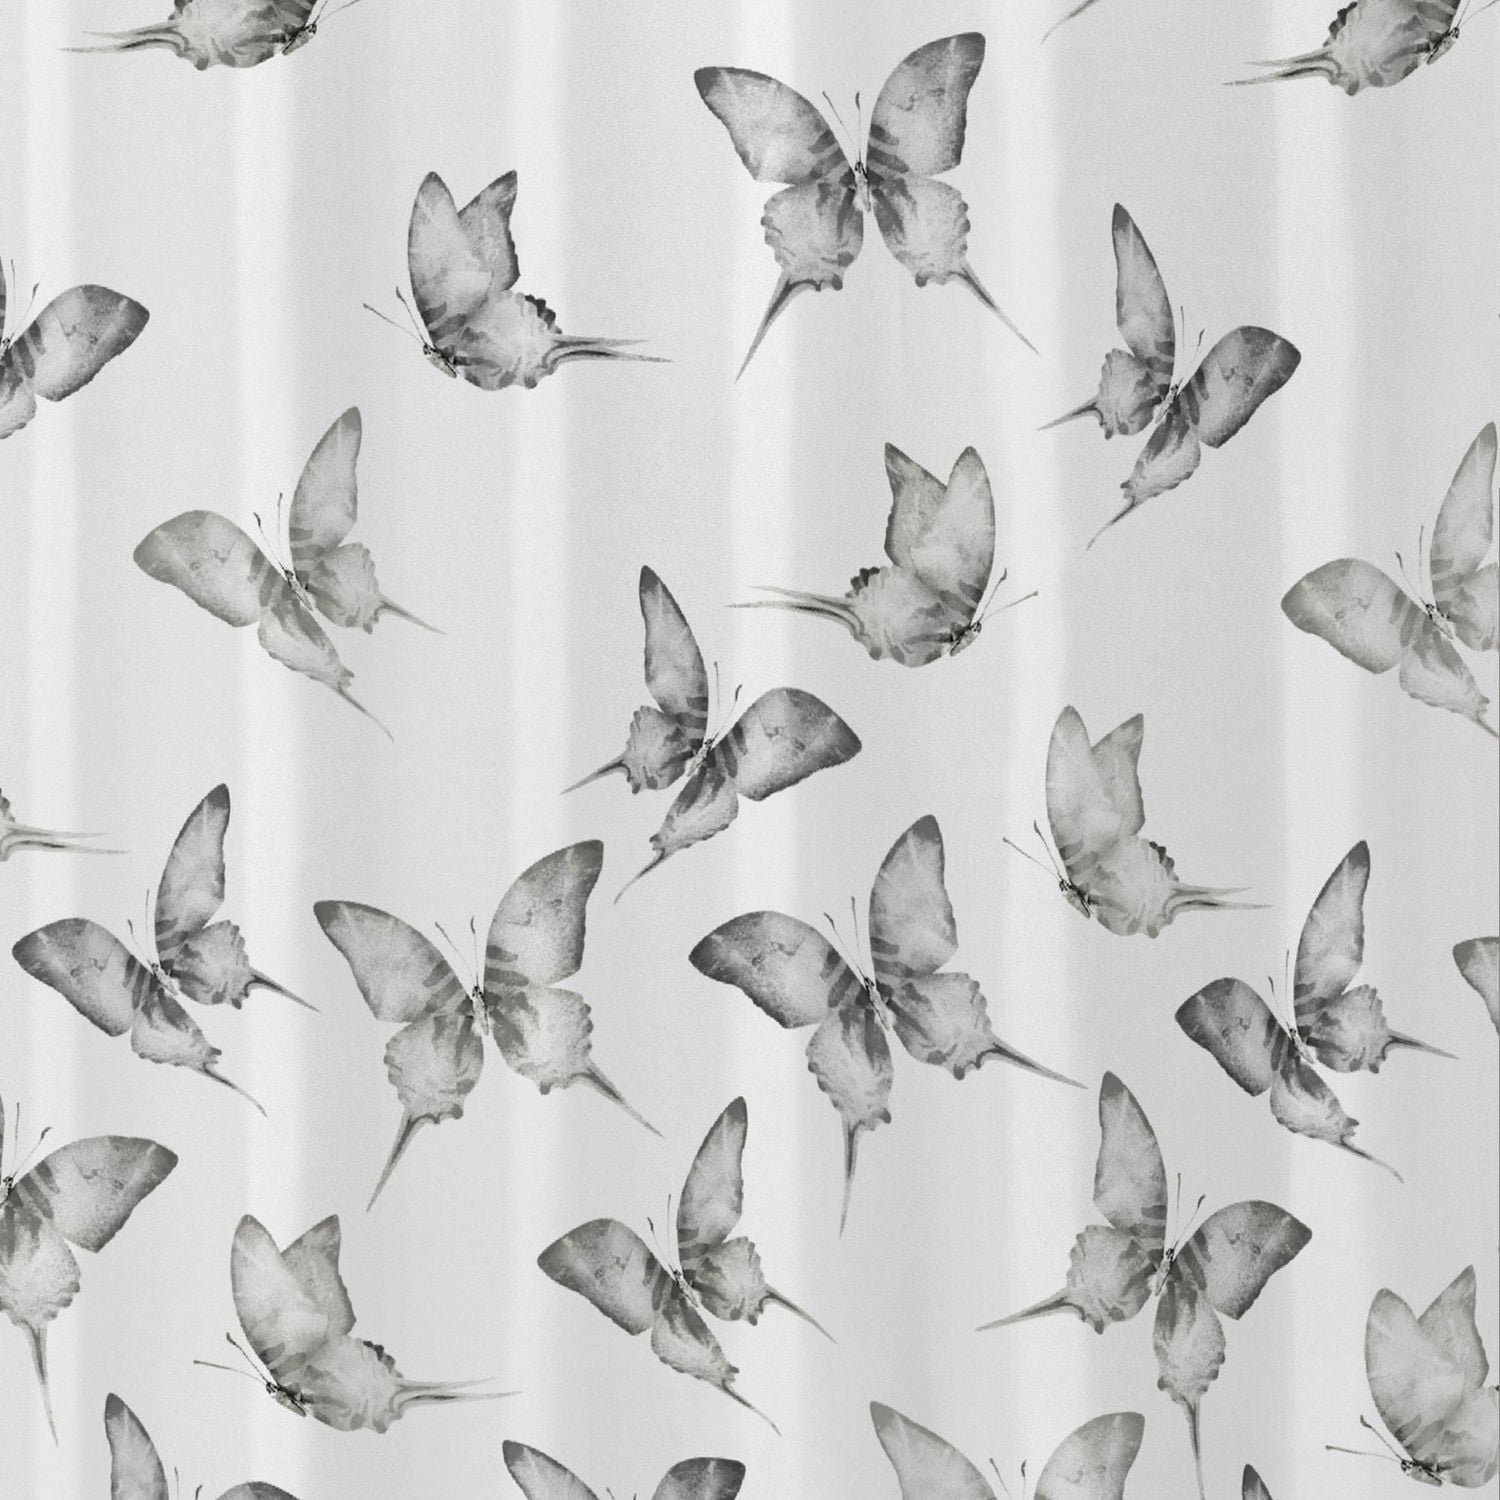 Hometrends Butterfly Fabric Shower Curtain, Black, Butterfly